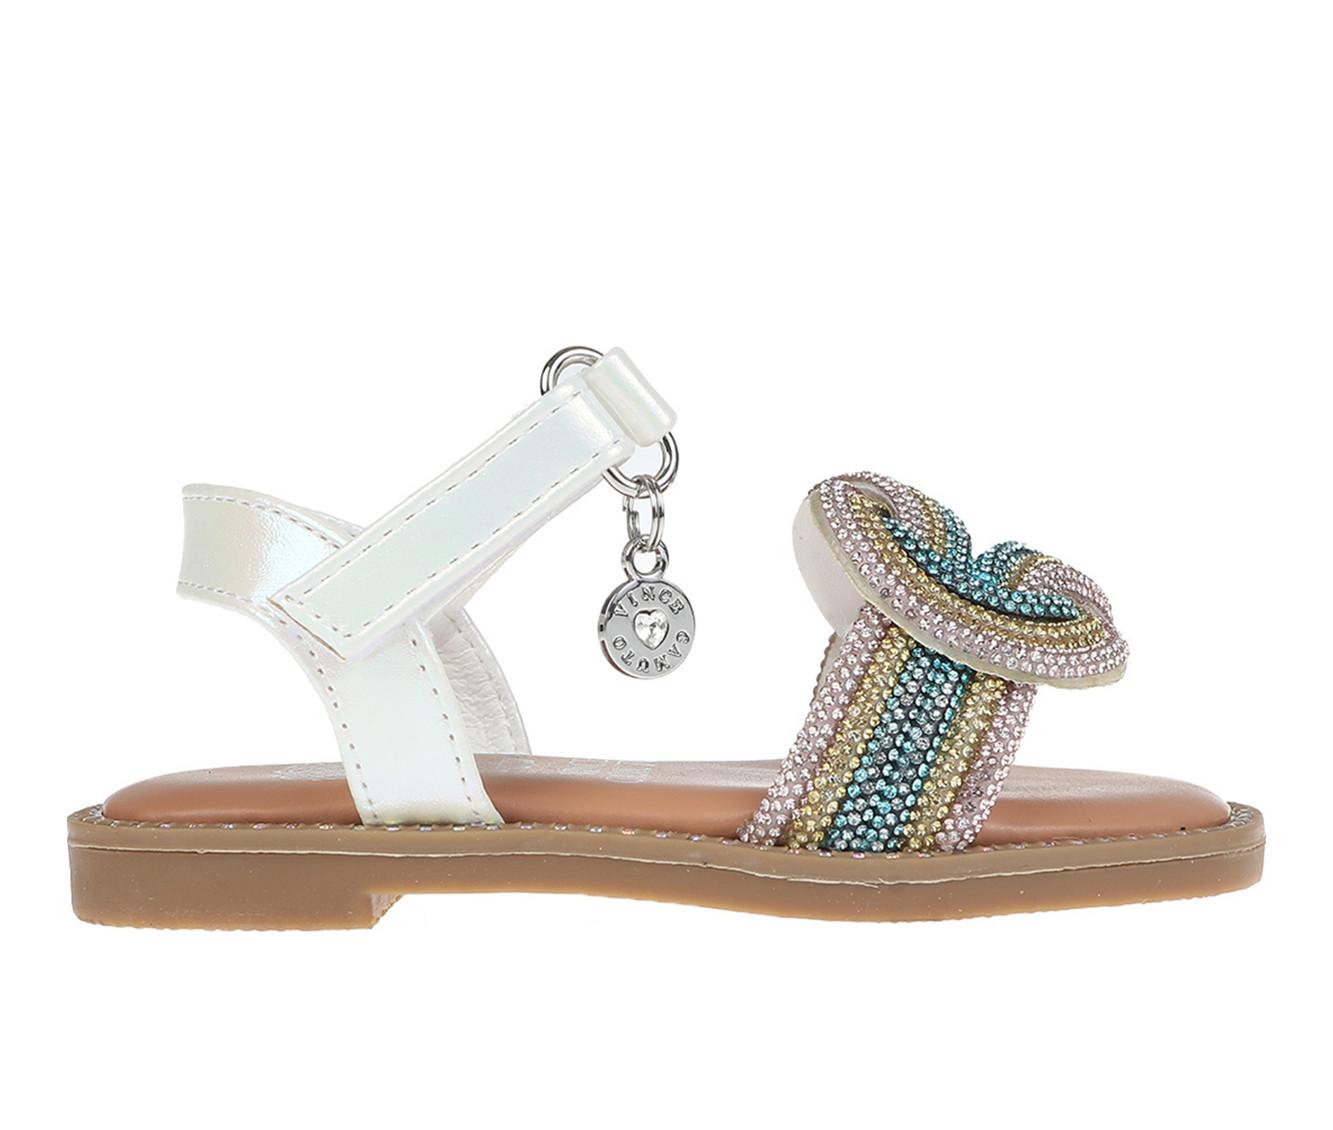 Girls' Vince Camuto Toddler Lil Blaire Sandals